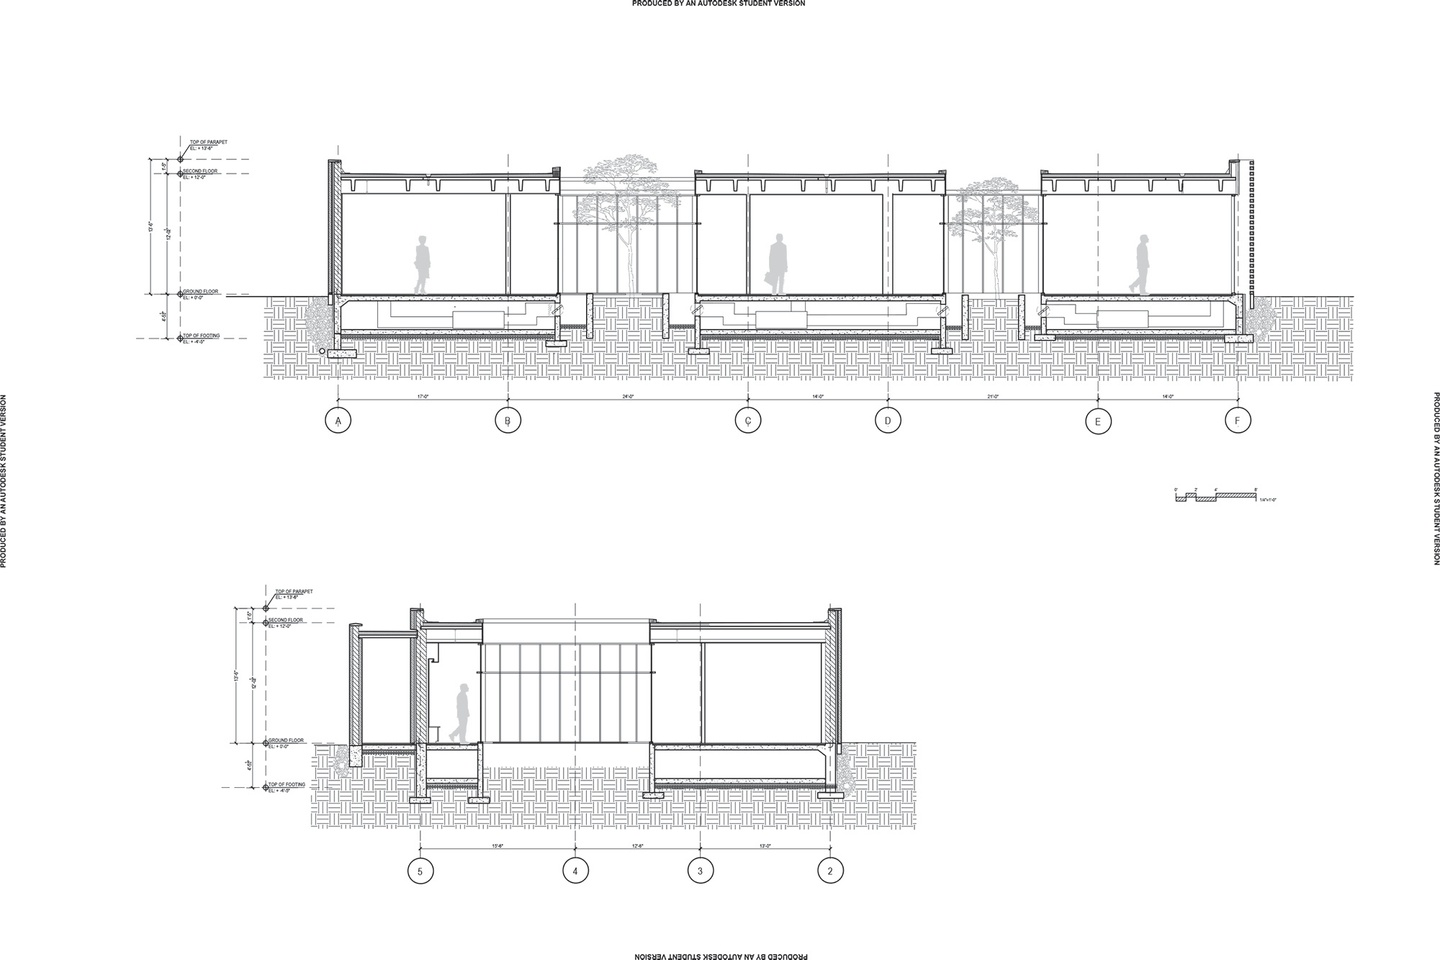 Computer drawings of two building sections showing one level of orthogonal spaces with courtyard spaces. 